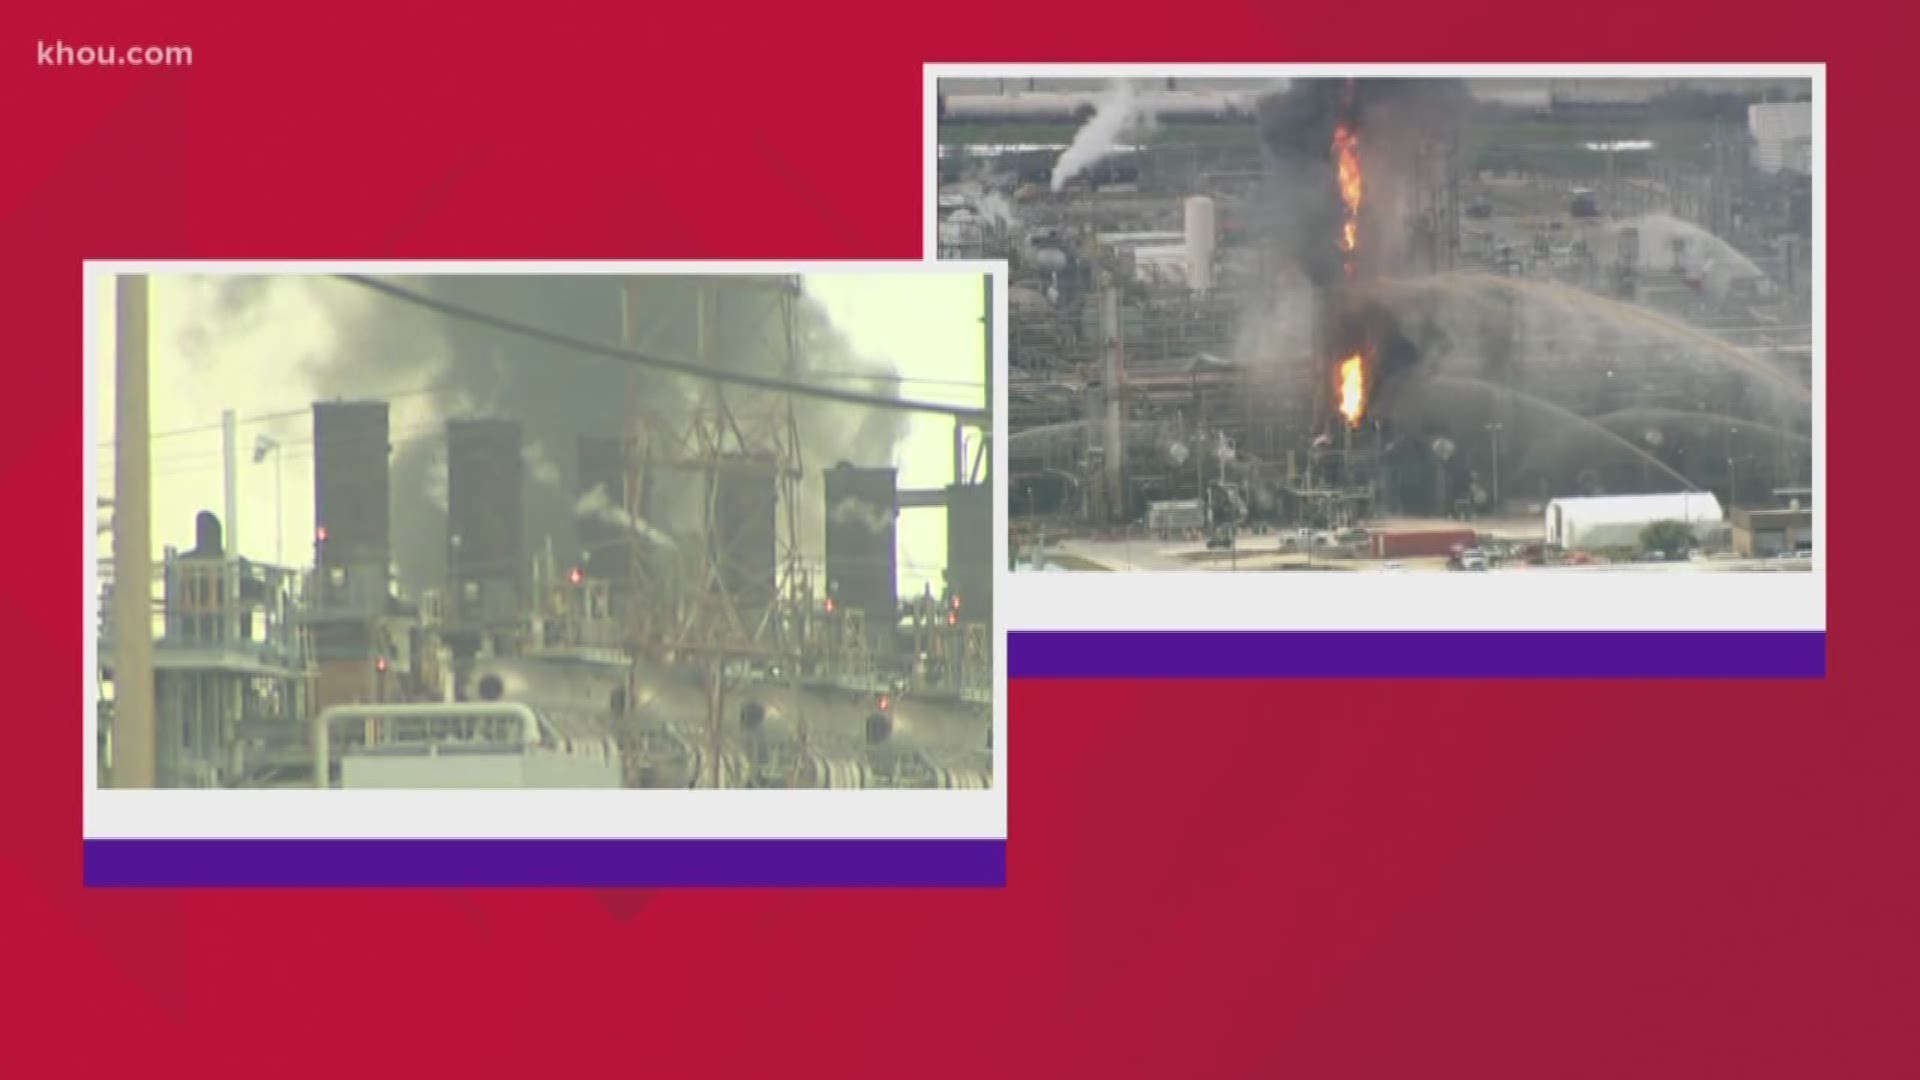 Here's what we know about the ExxonMobil plant in Baytown and the facility's history.